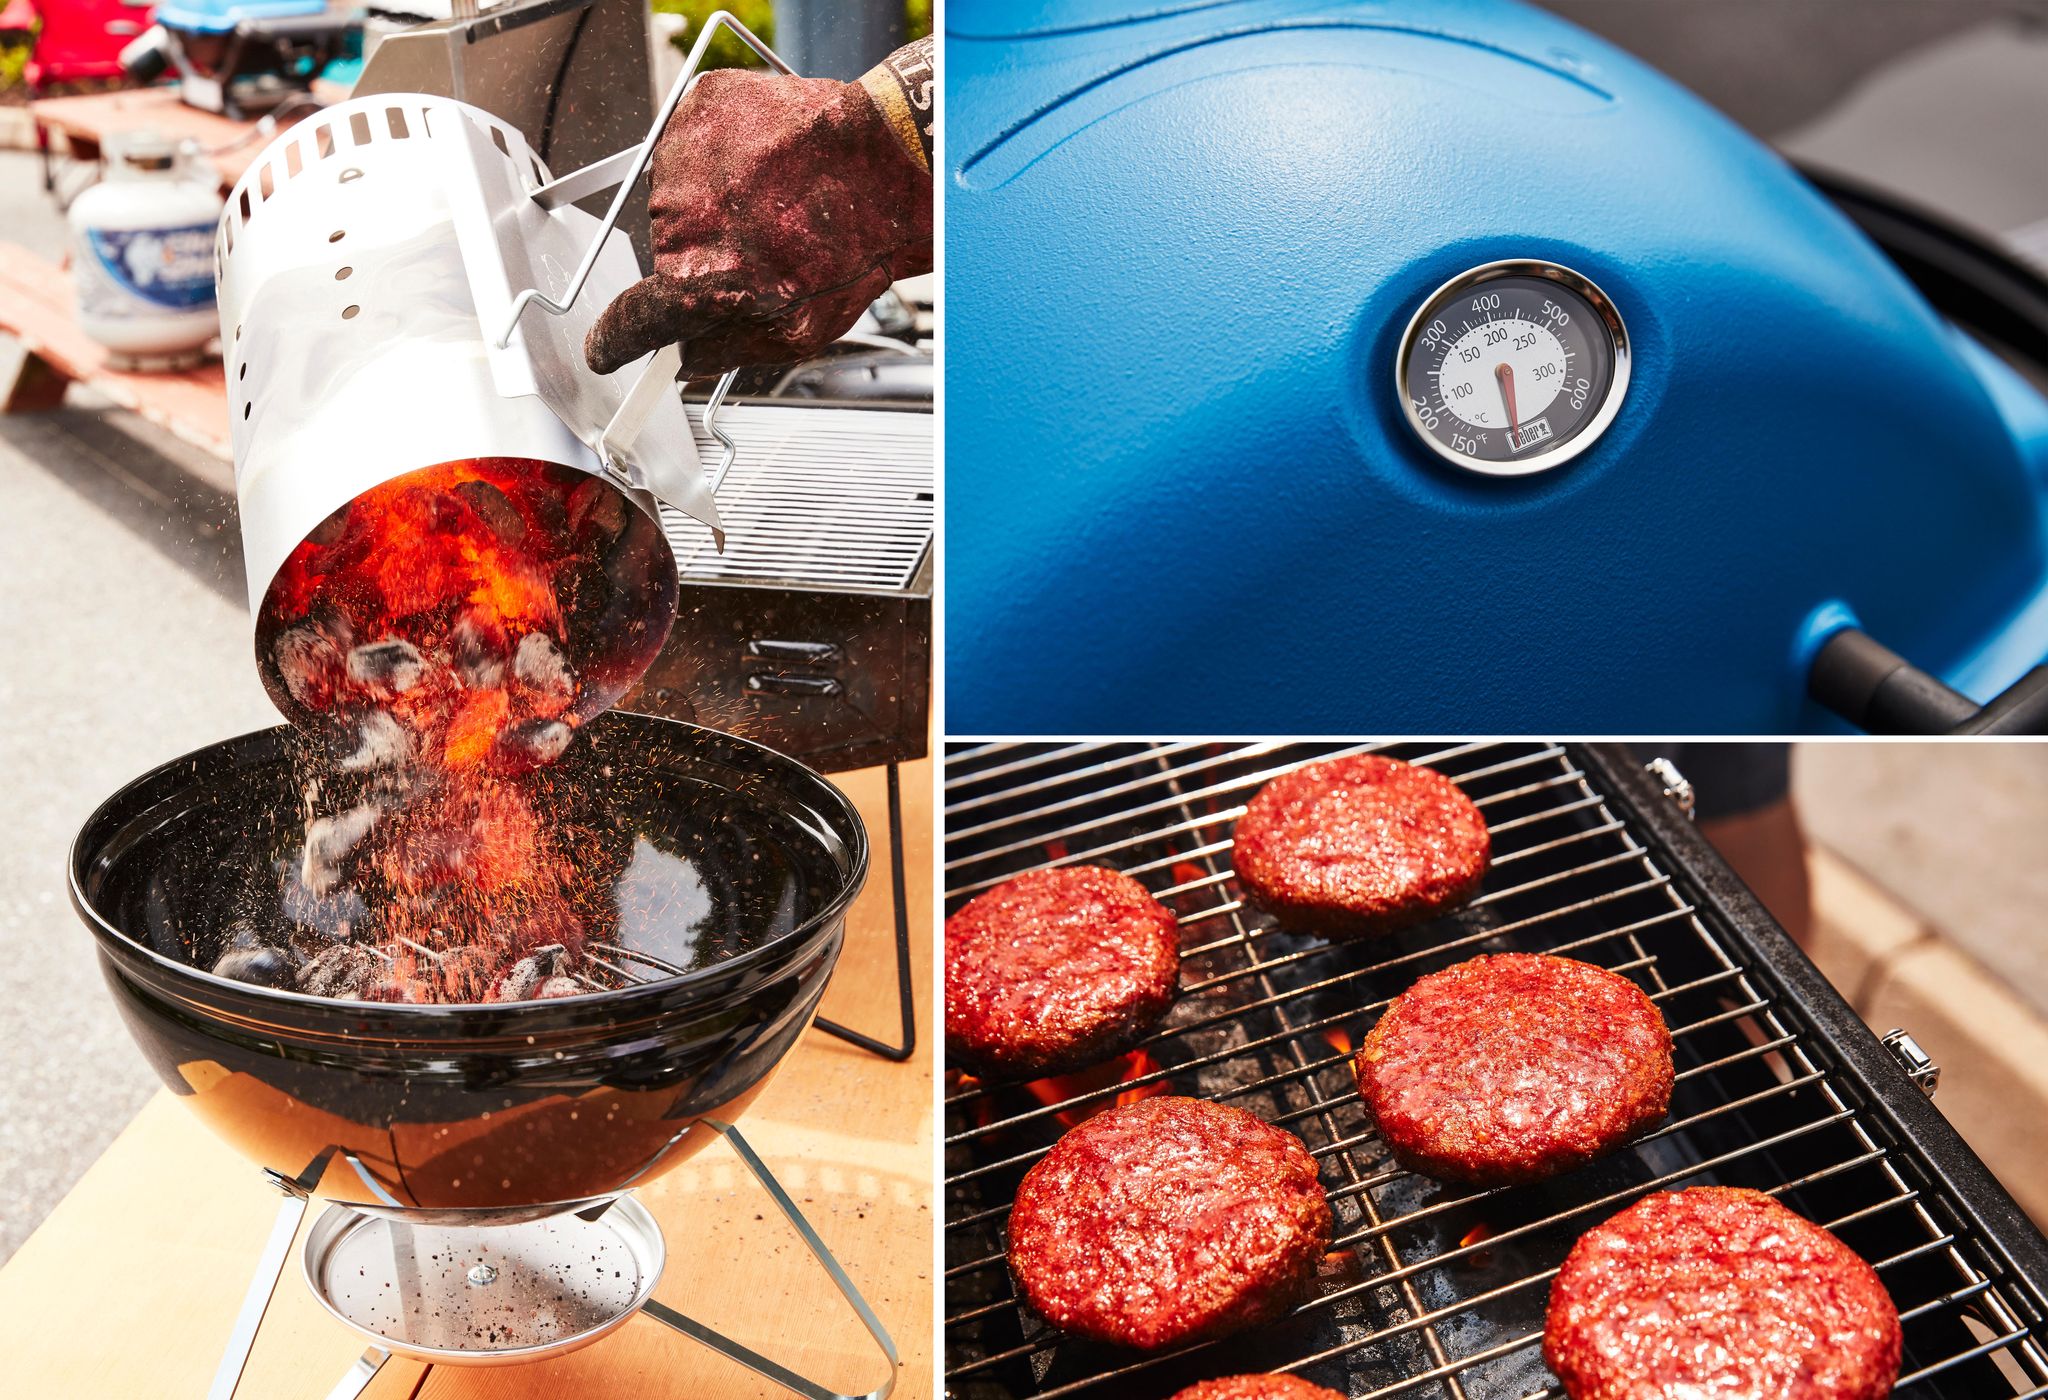 Barbecue grill, Food, Glass, Cooking, Recipe, Barware, Cuisine, Drinkware, Barbecue, Grilling, 